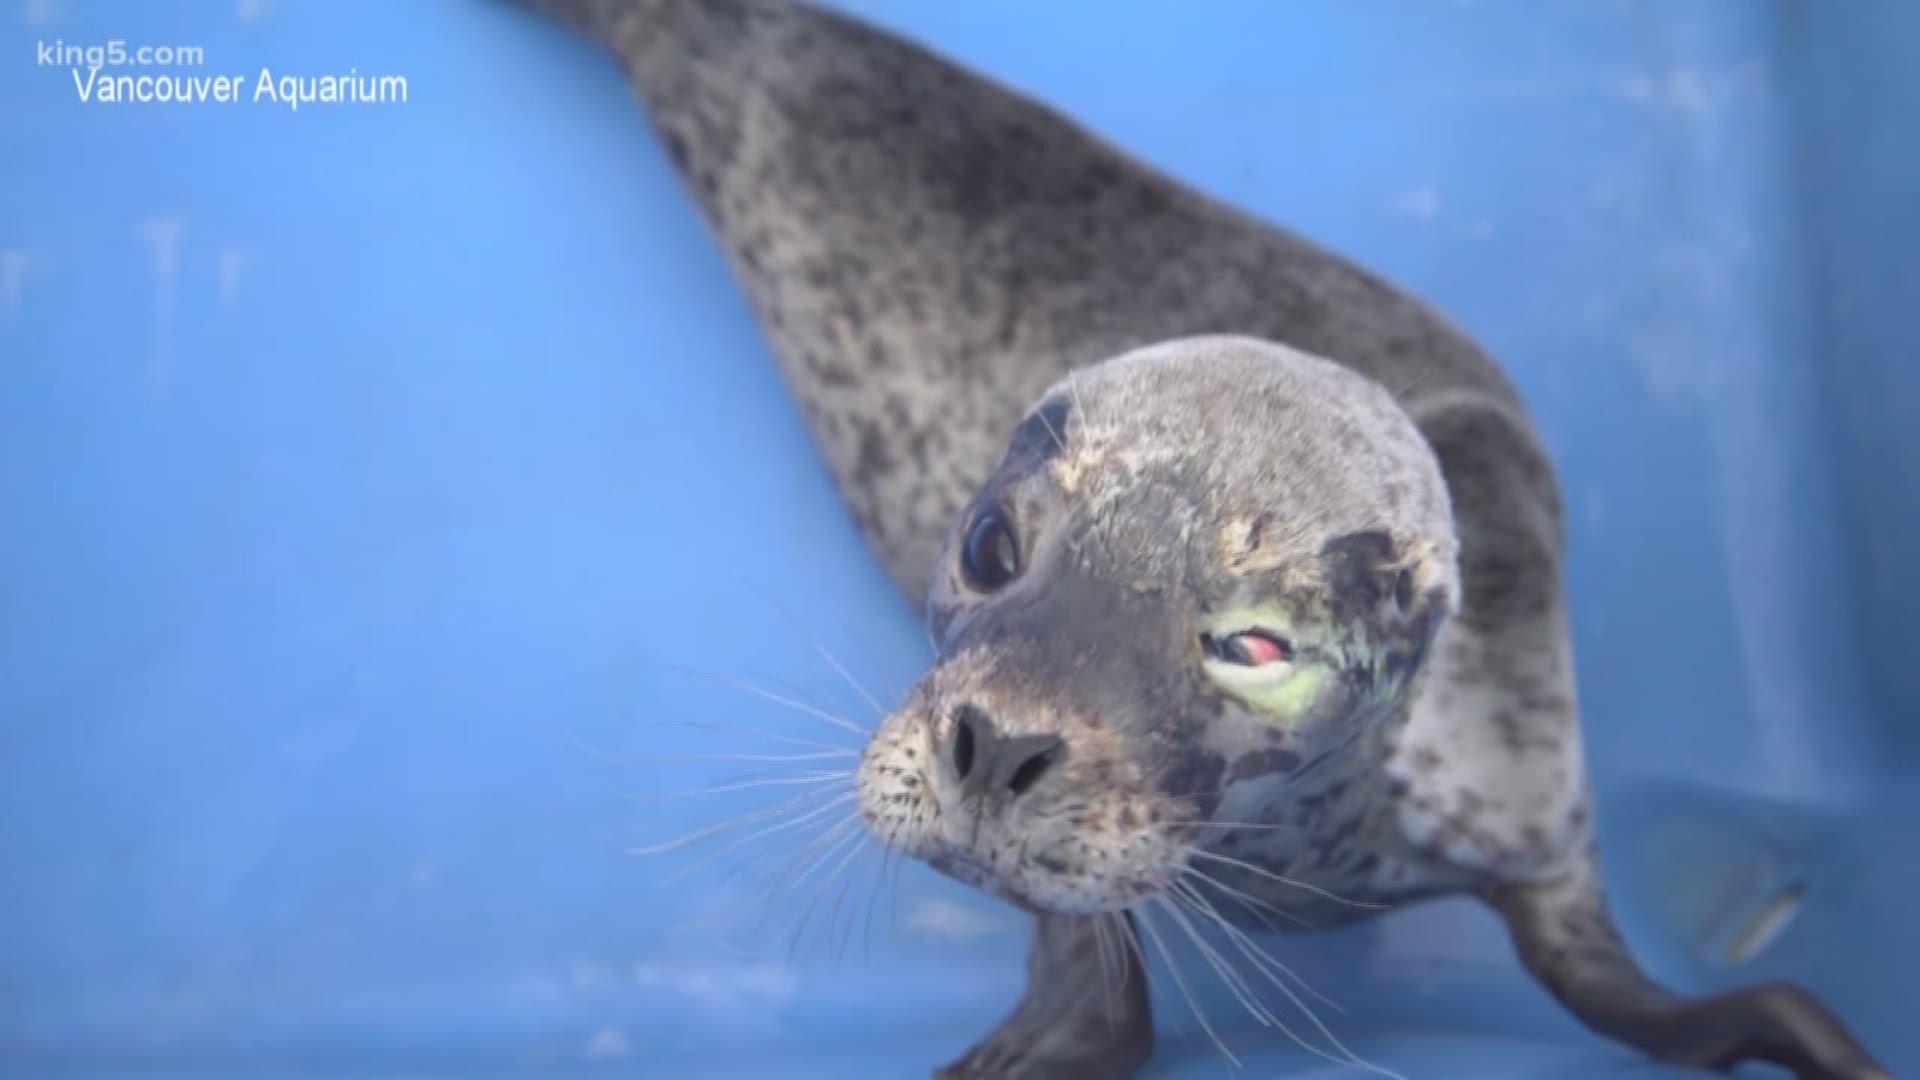 A young harbor seal is recovering at the Vancouver Aquarium after she was found stranded with birdshot pellets in her head. KING 5 Environmental Reporter Alison Morrow shows us why veterinarians say she's another example of an injury they are seeing far too often.